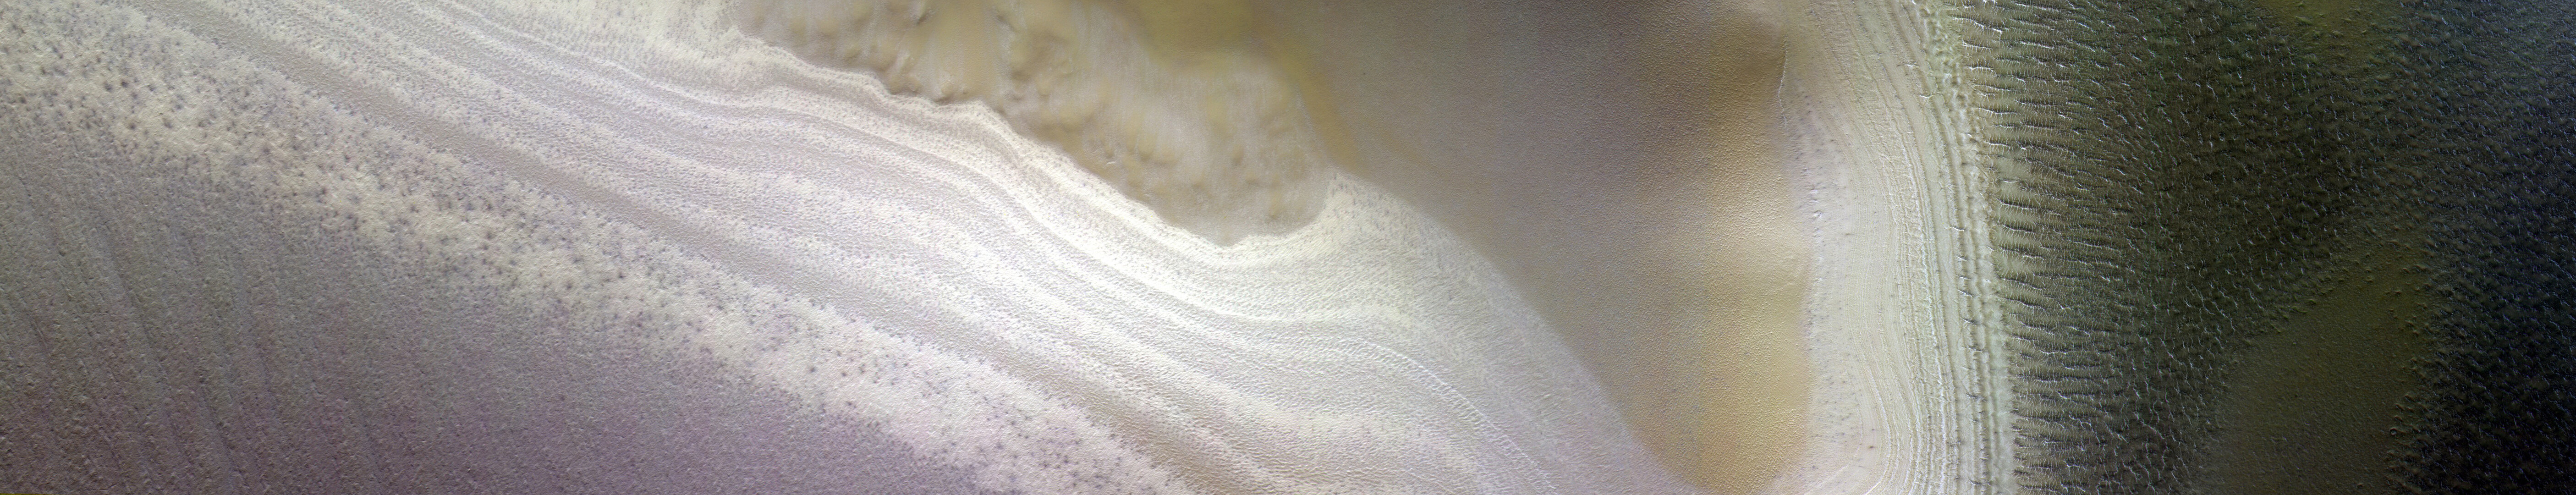 Layered deposits at the south pole of Mars